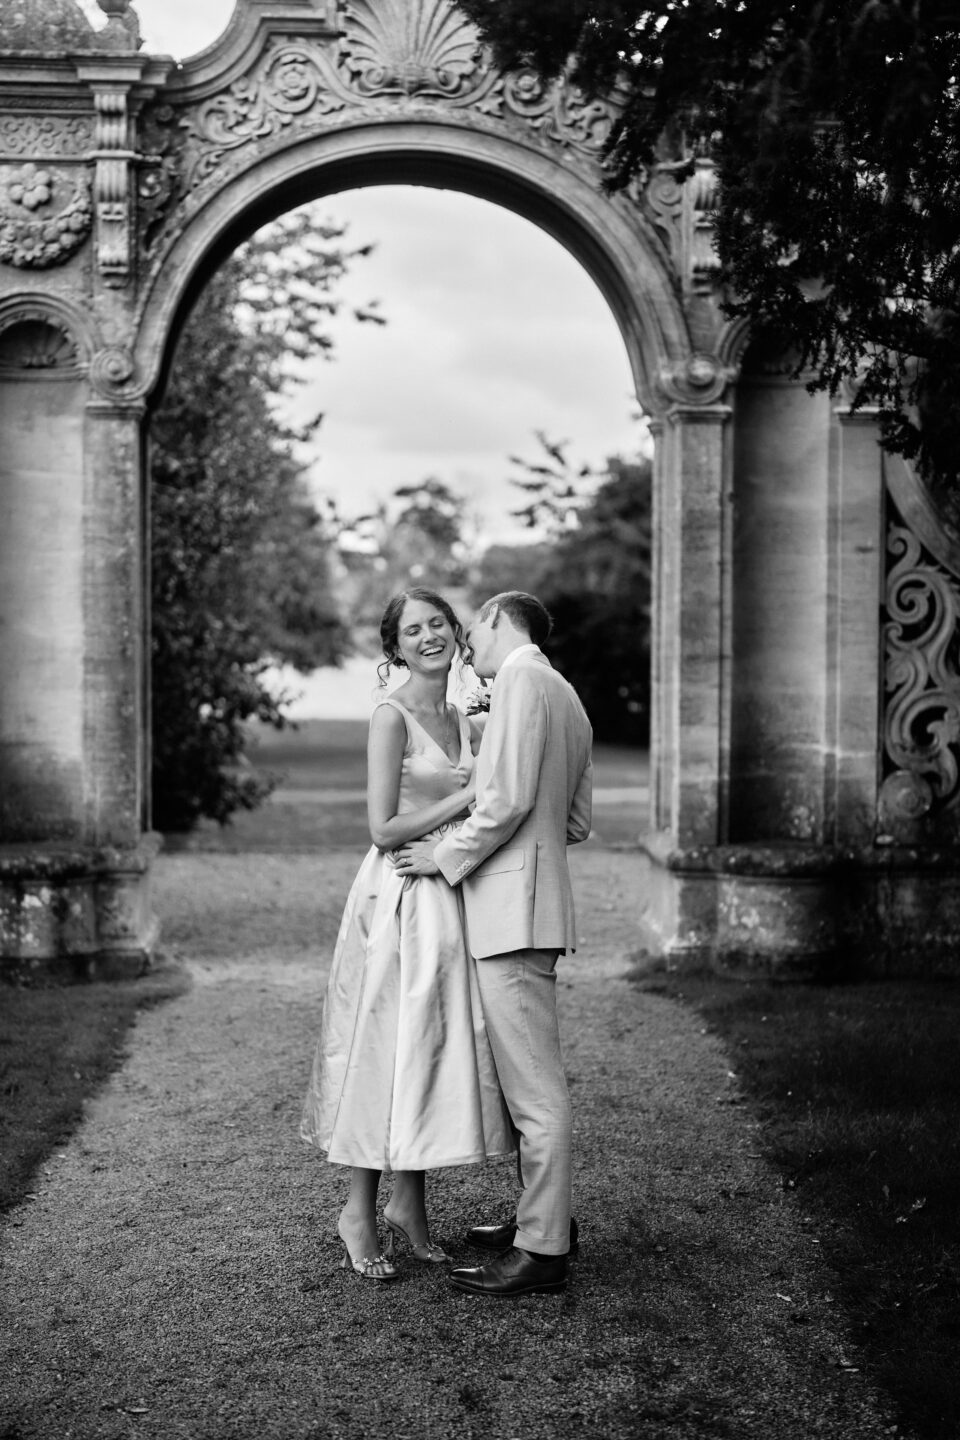 A black and white picture of a newly married couple posing in front of an arch.